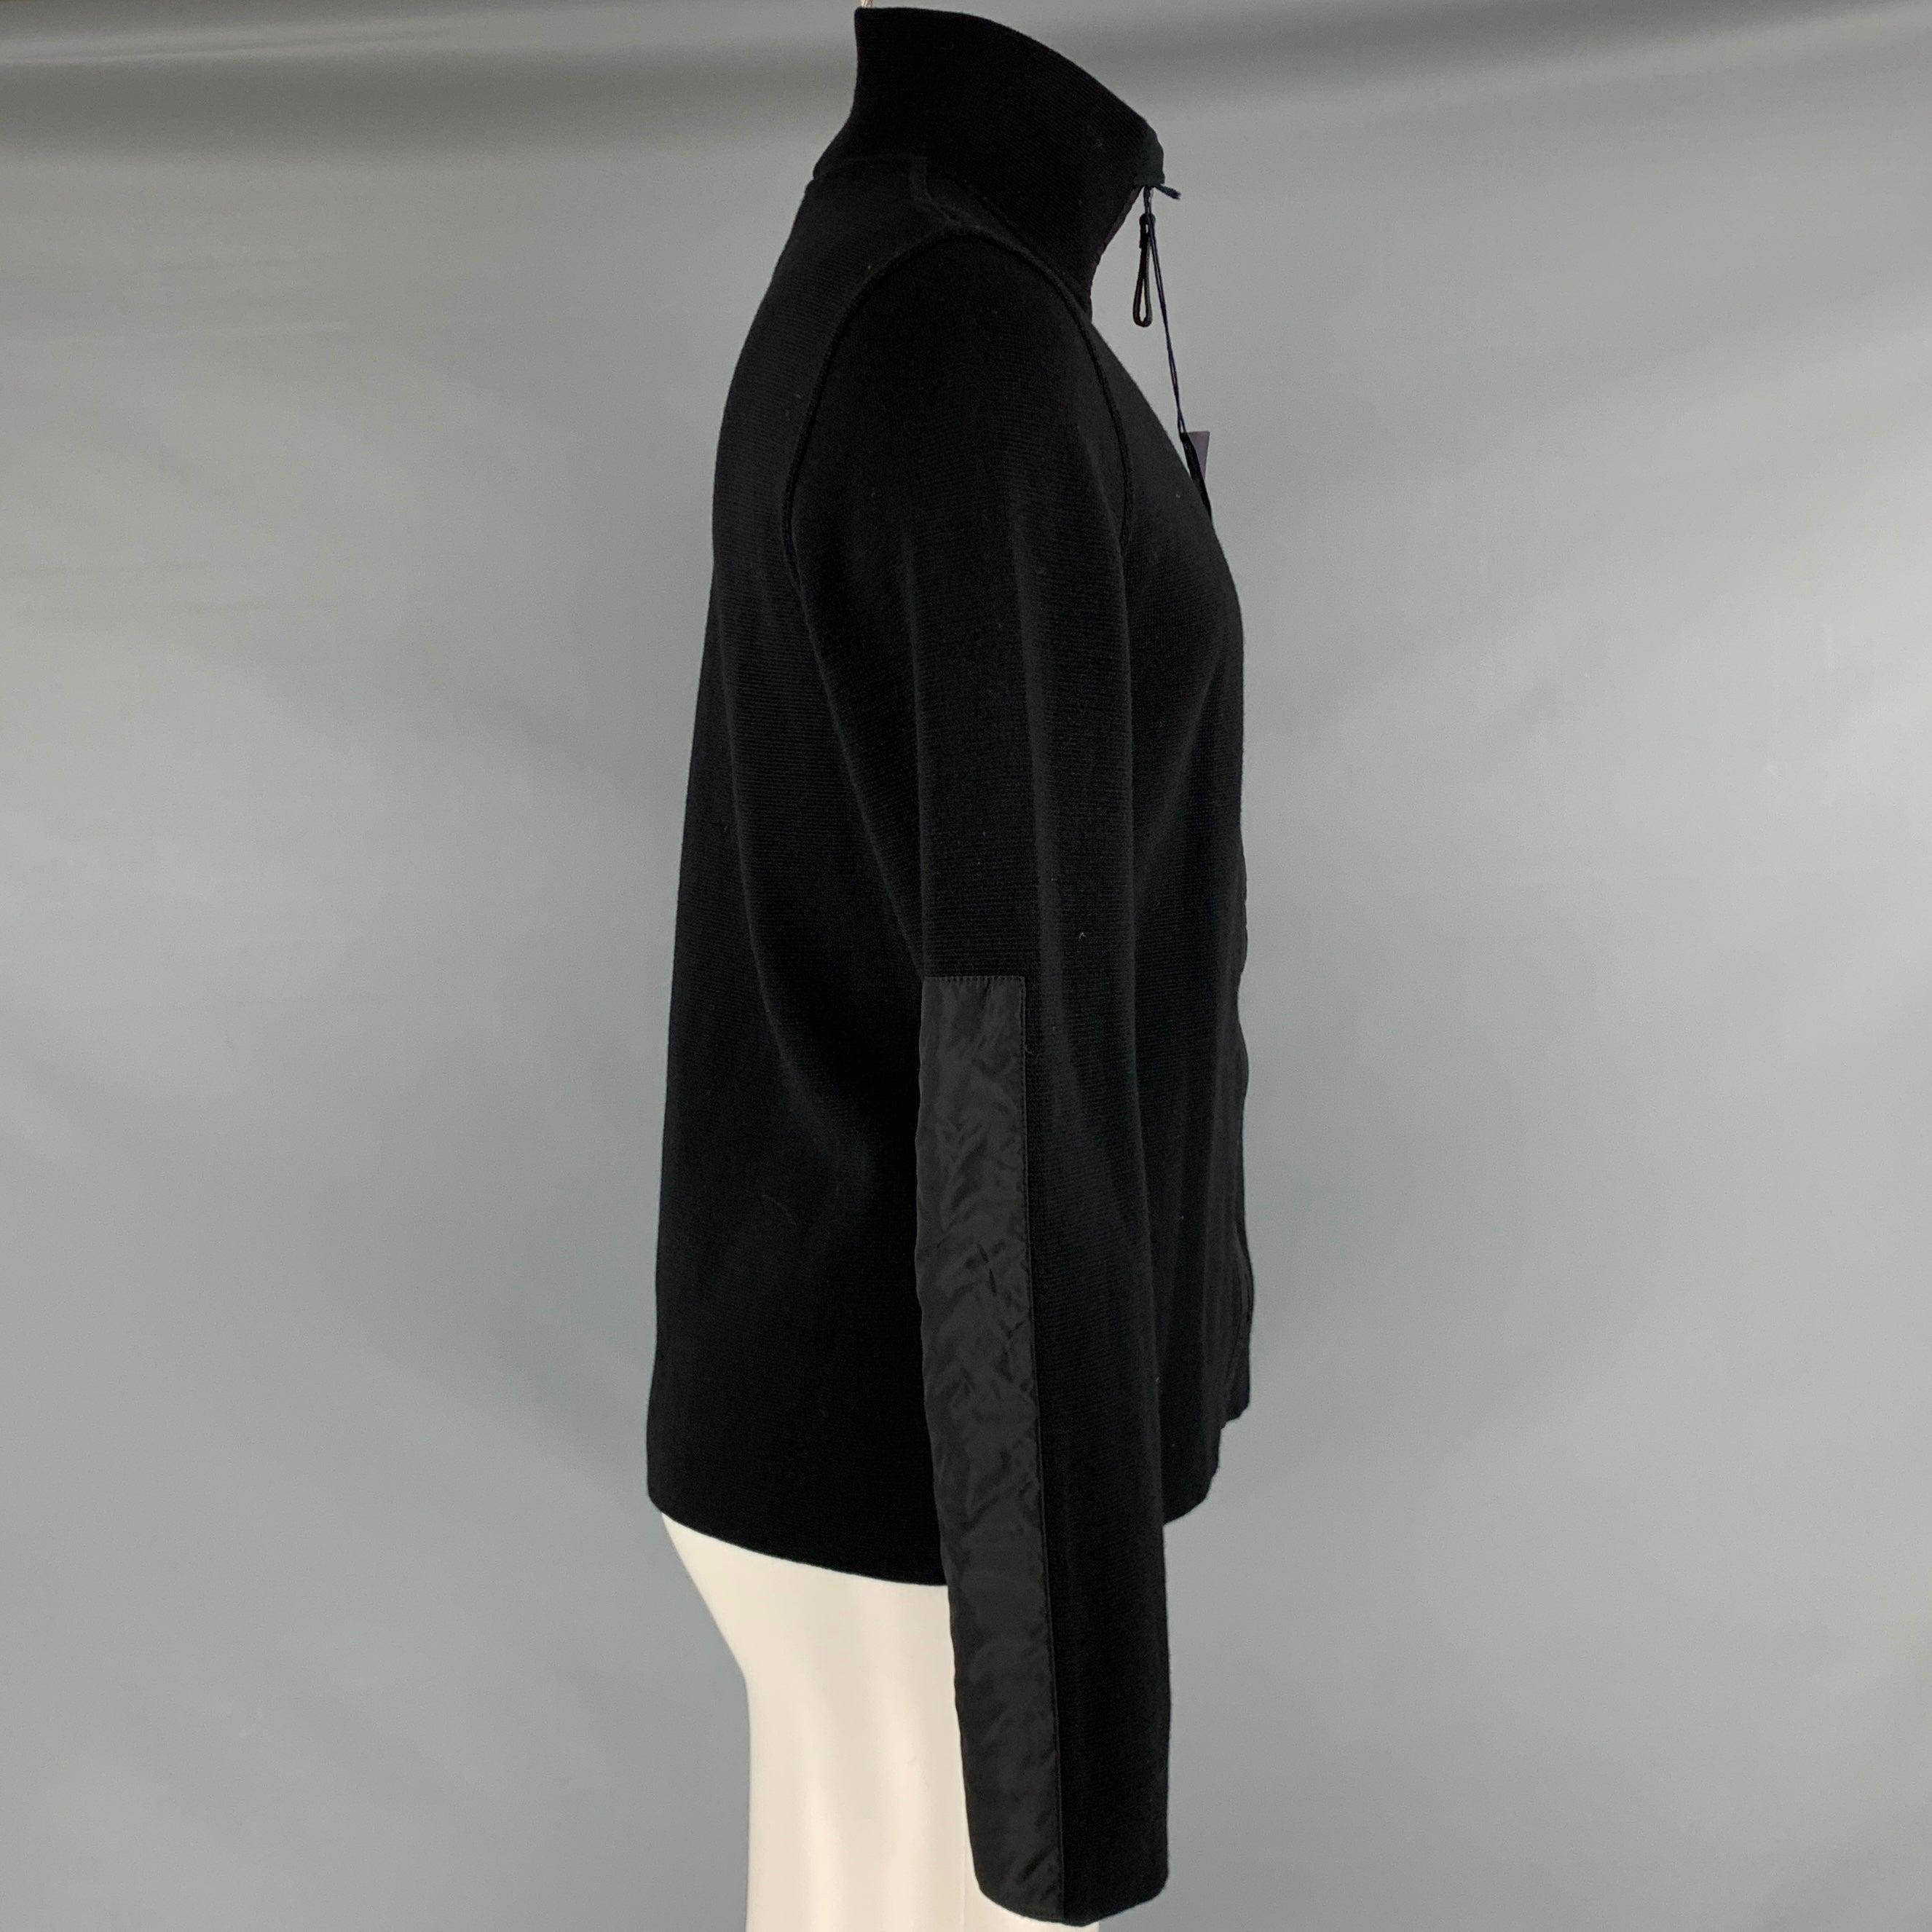 PRADA jacket in a black wool fabric with nylon trim, featuring a waffle knit style, blouson sleeves, and zip up closure. Made in Romania.Very Good Pre-Owned Condition with Tags. Small tear on back. 

Marked:   50 

Measurements: 
 
Shoulder: 16.5